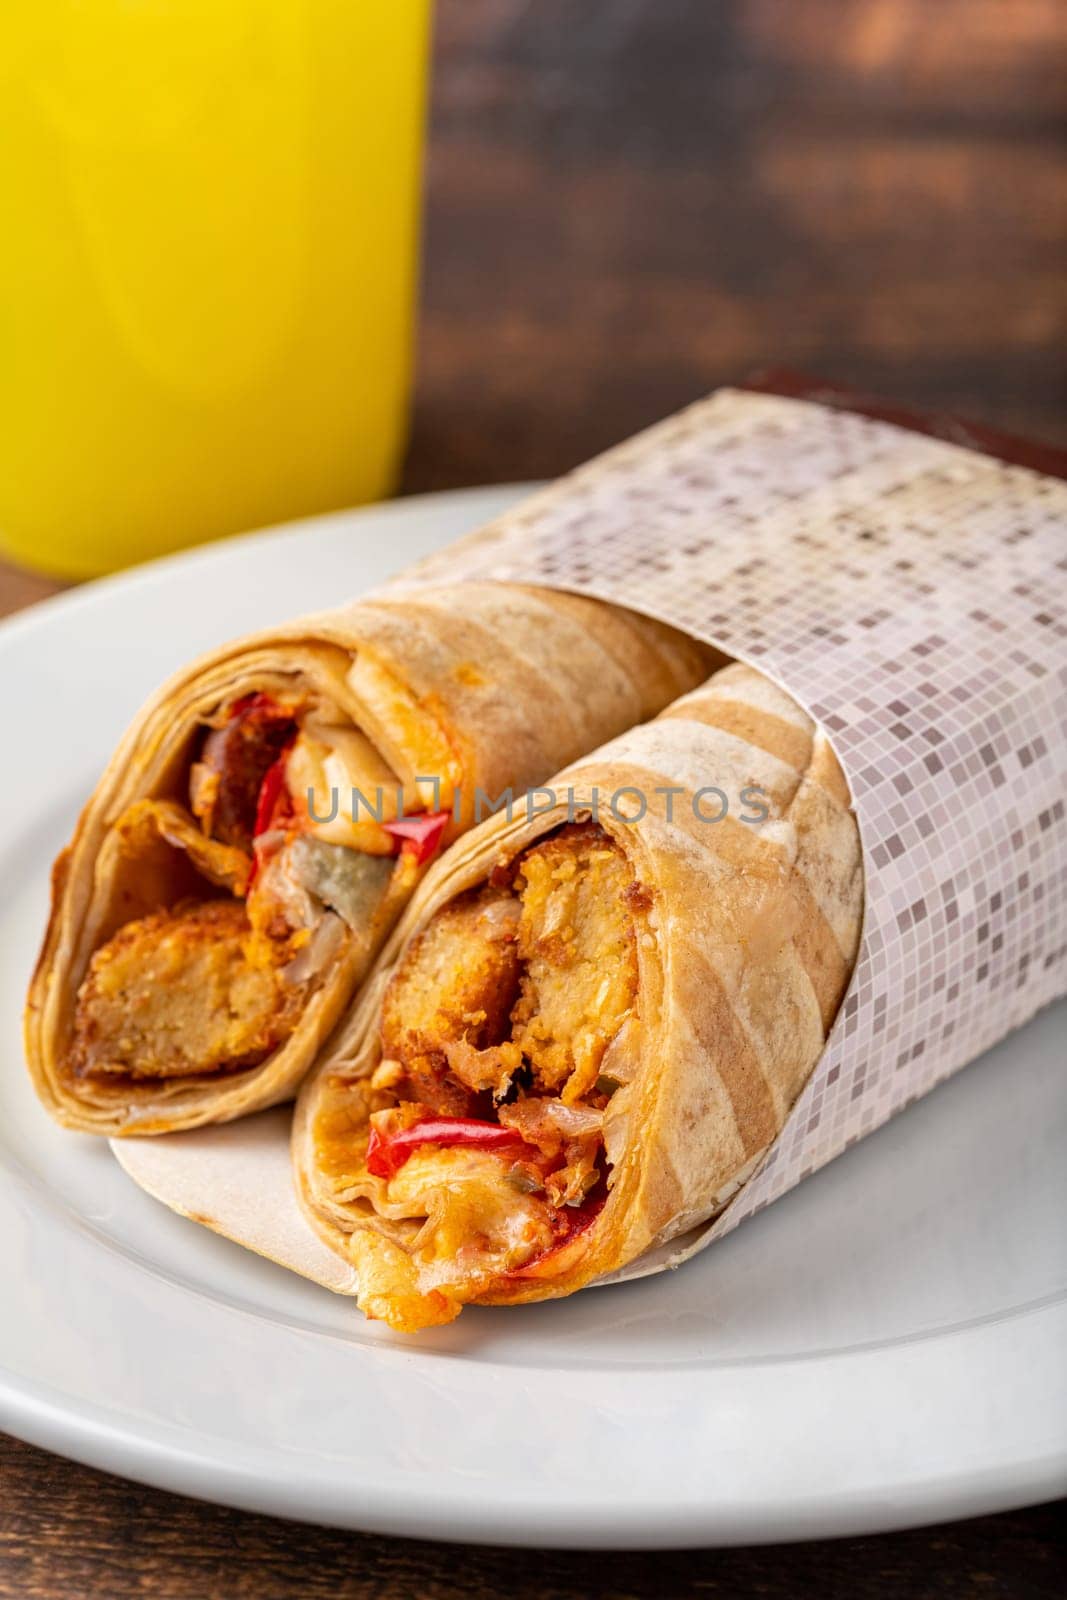 Chicken wrap with vegetables on a white porcelain plate on wooden table